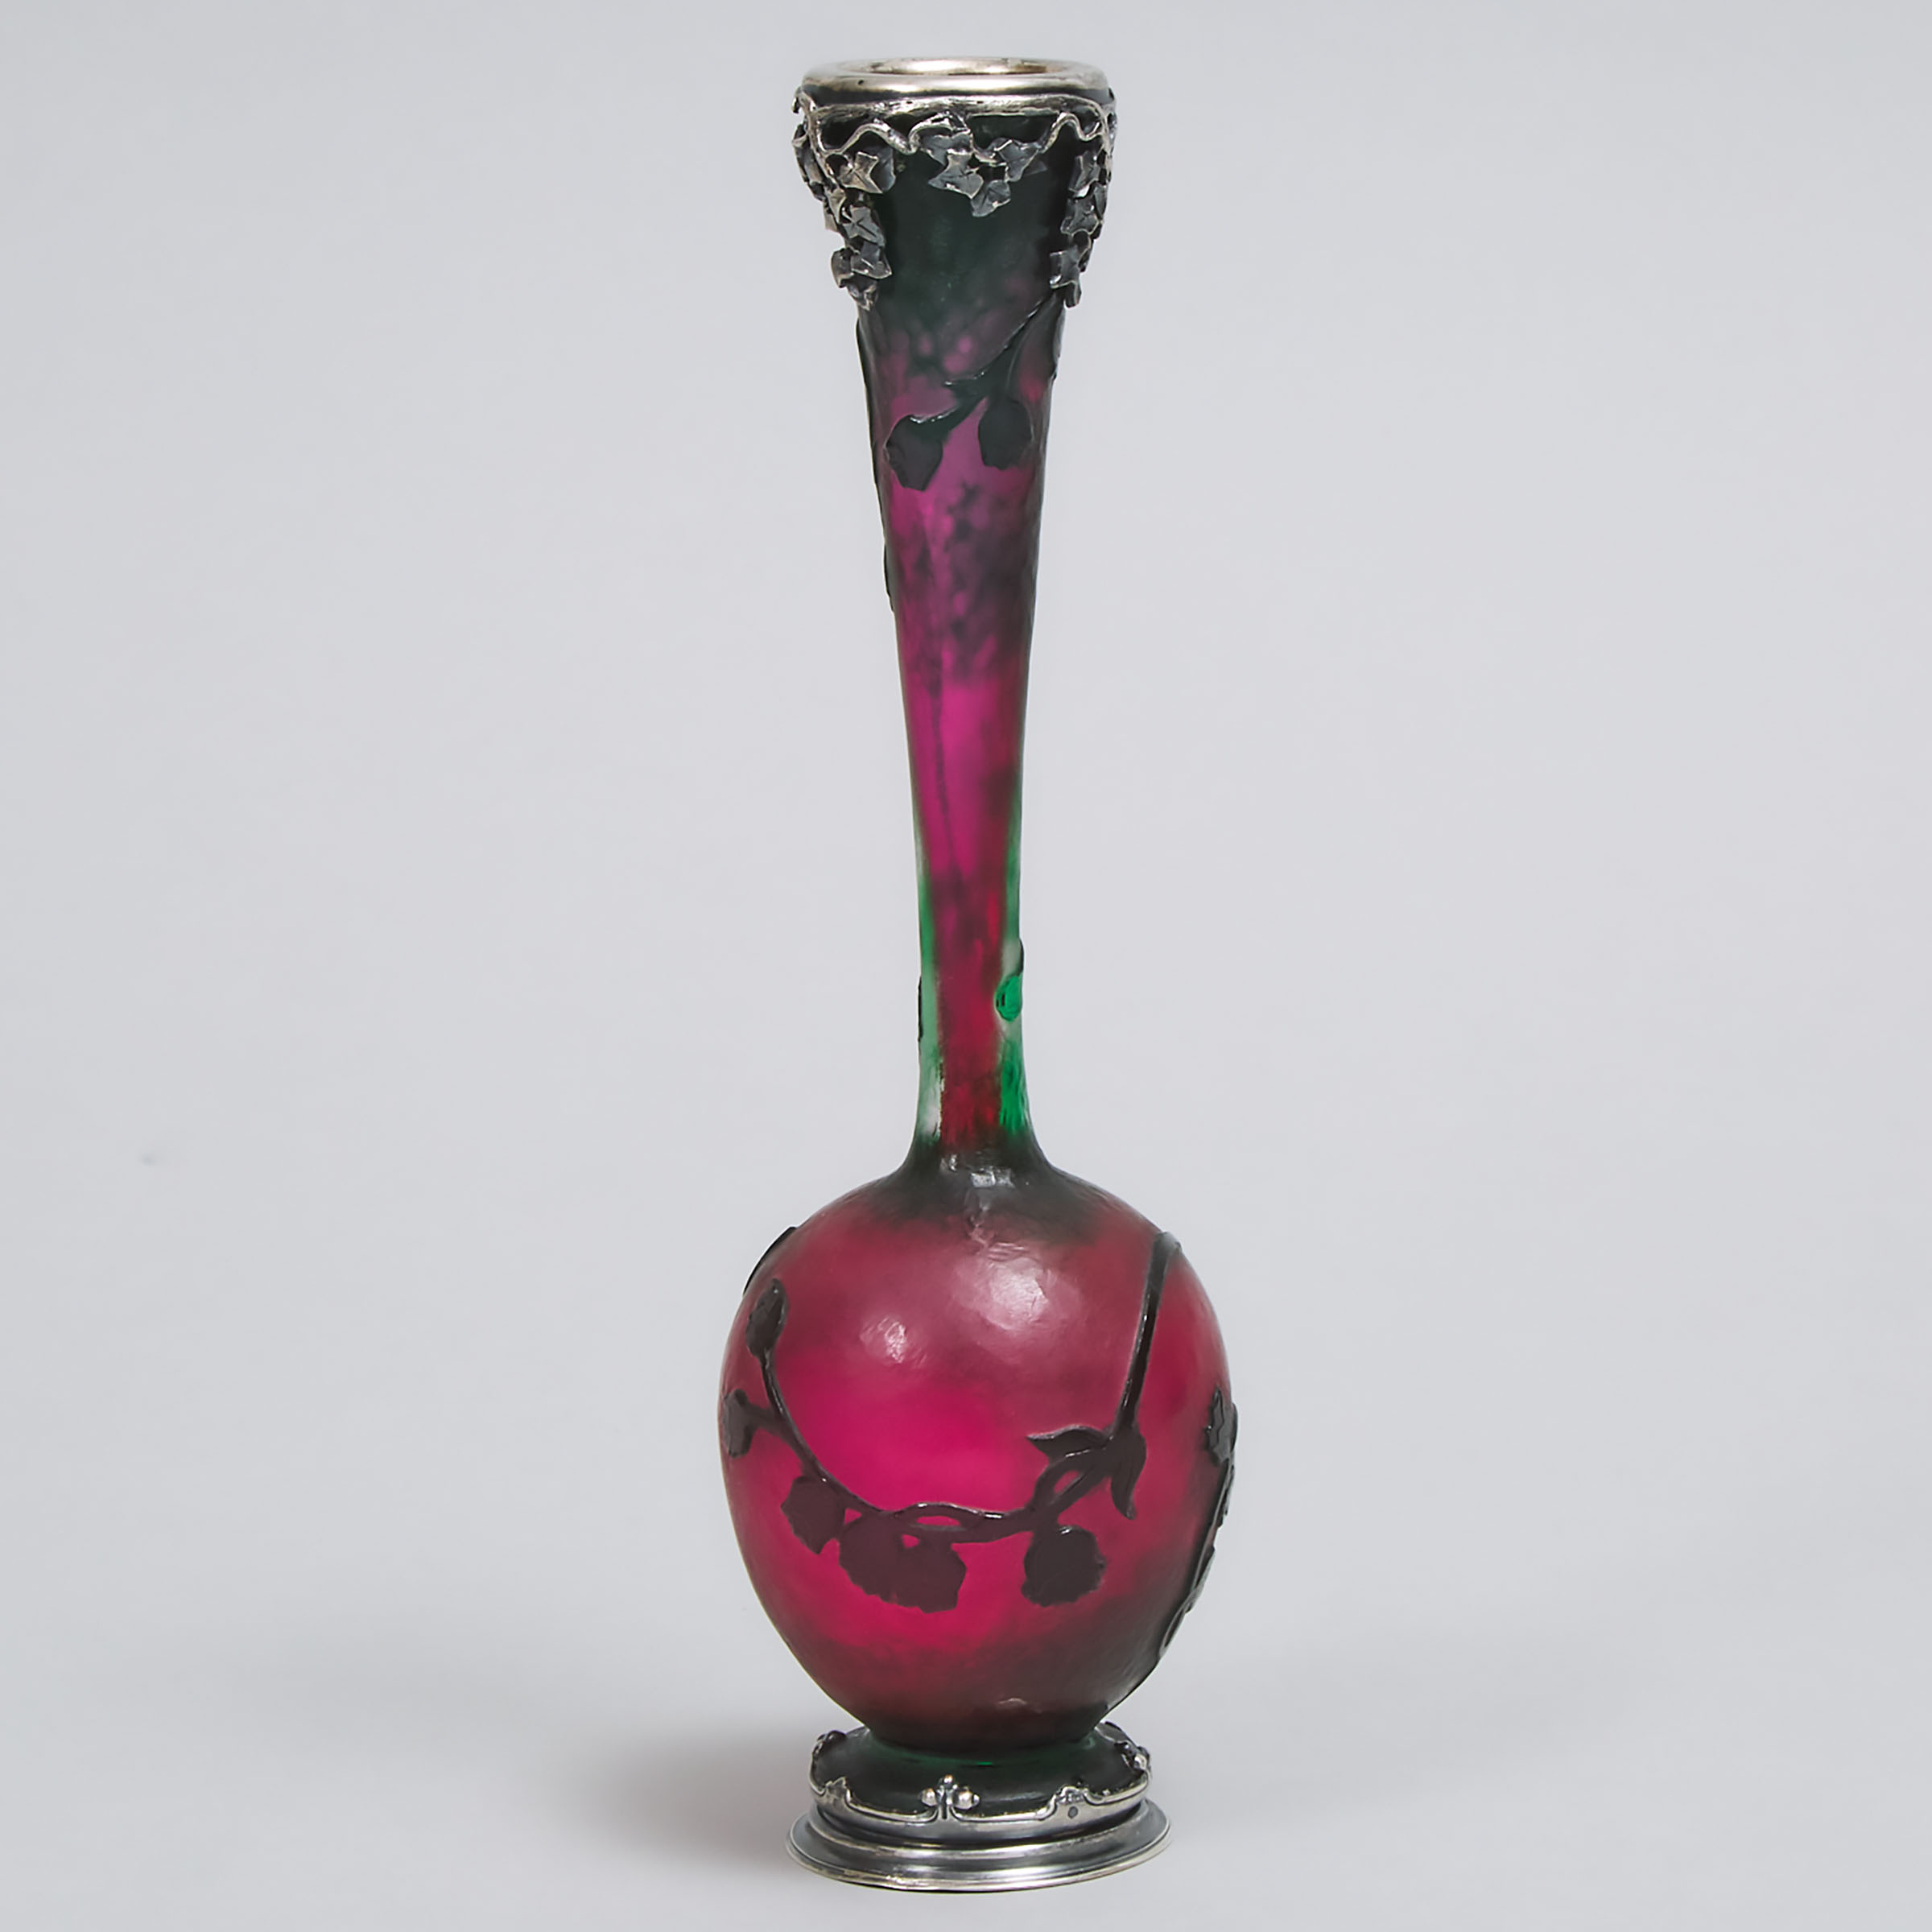 Daum Silver Mounted Lily of the Valley Cameo Glass Vase, c.1900